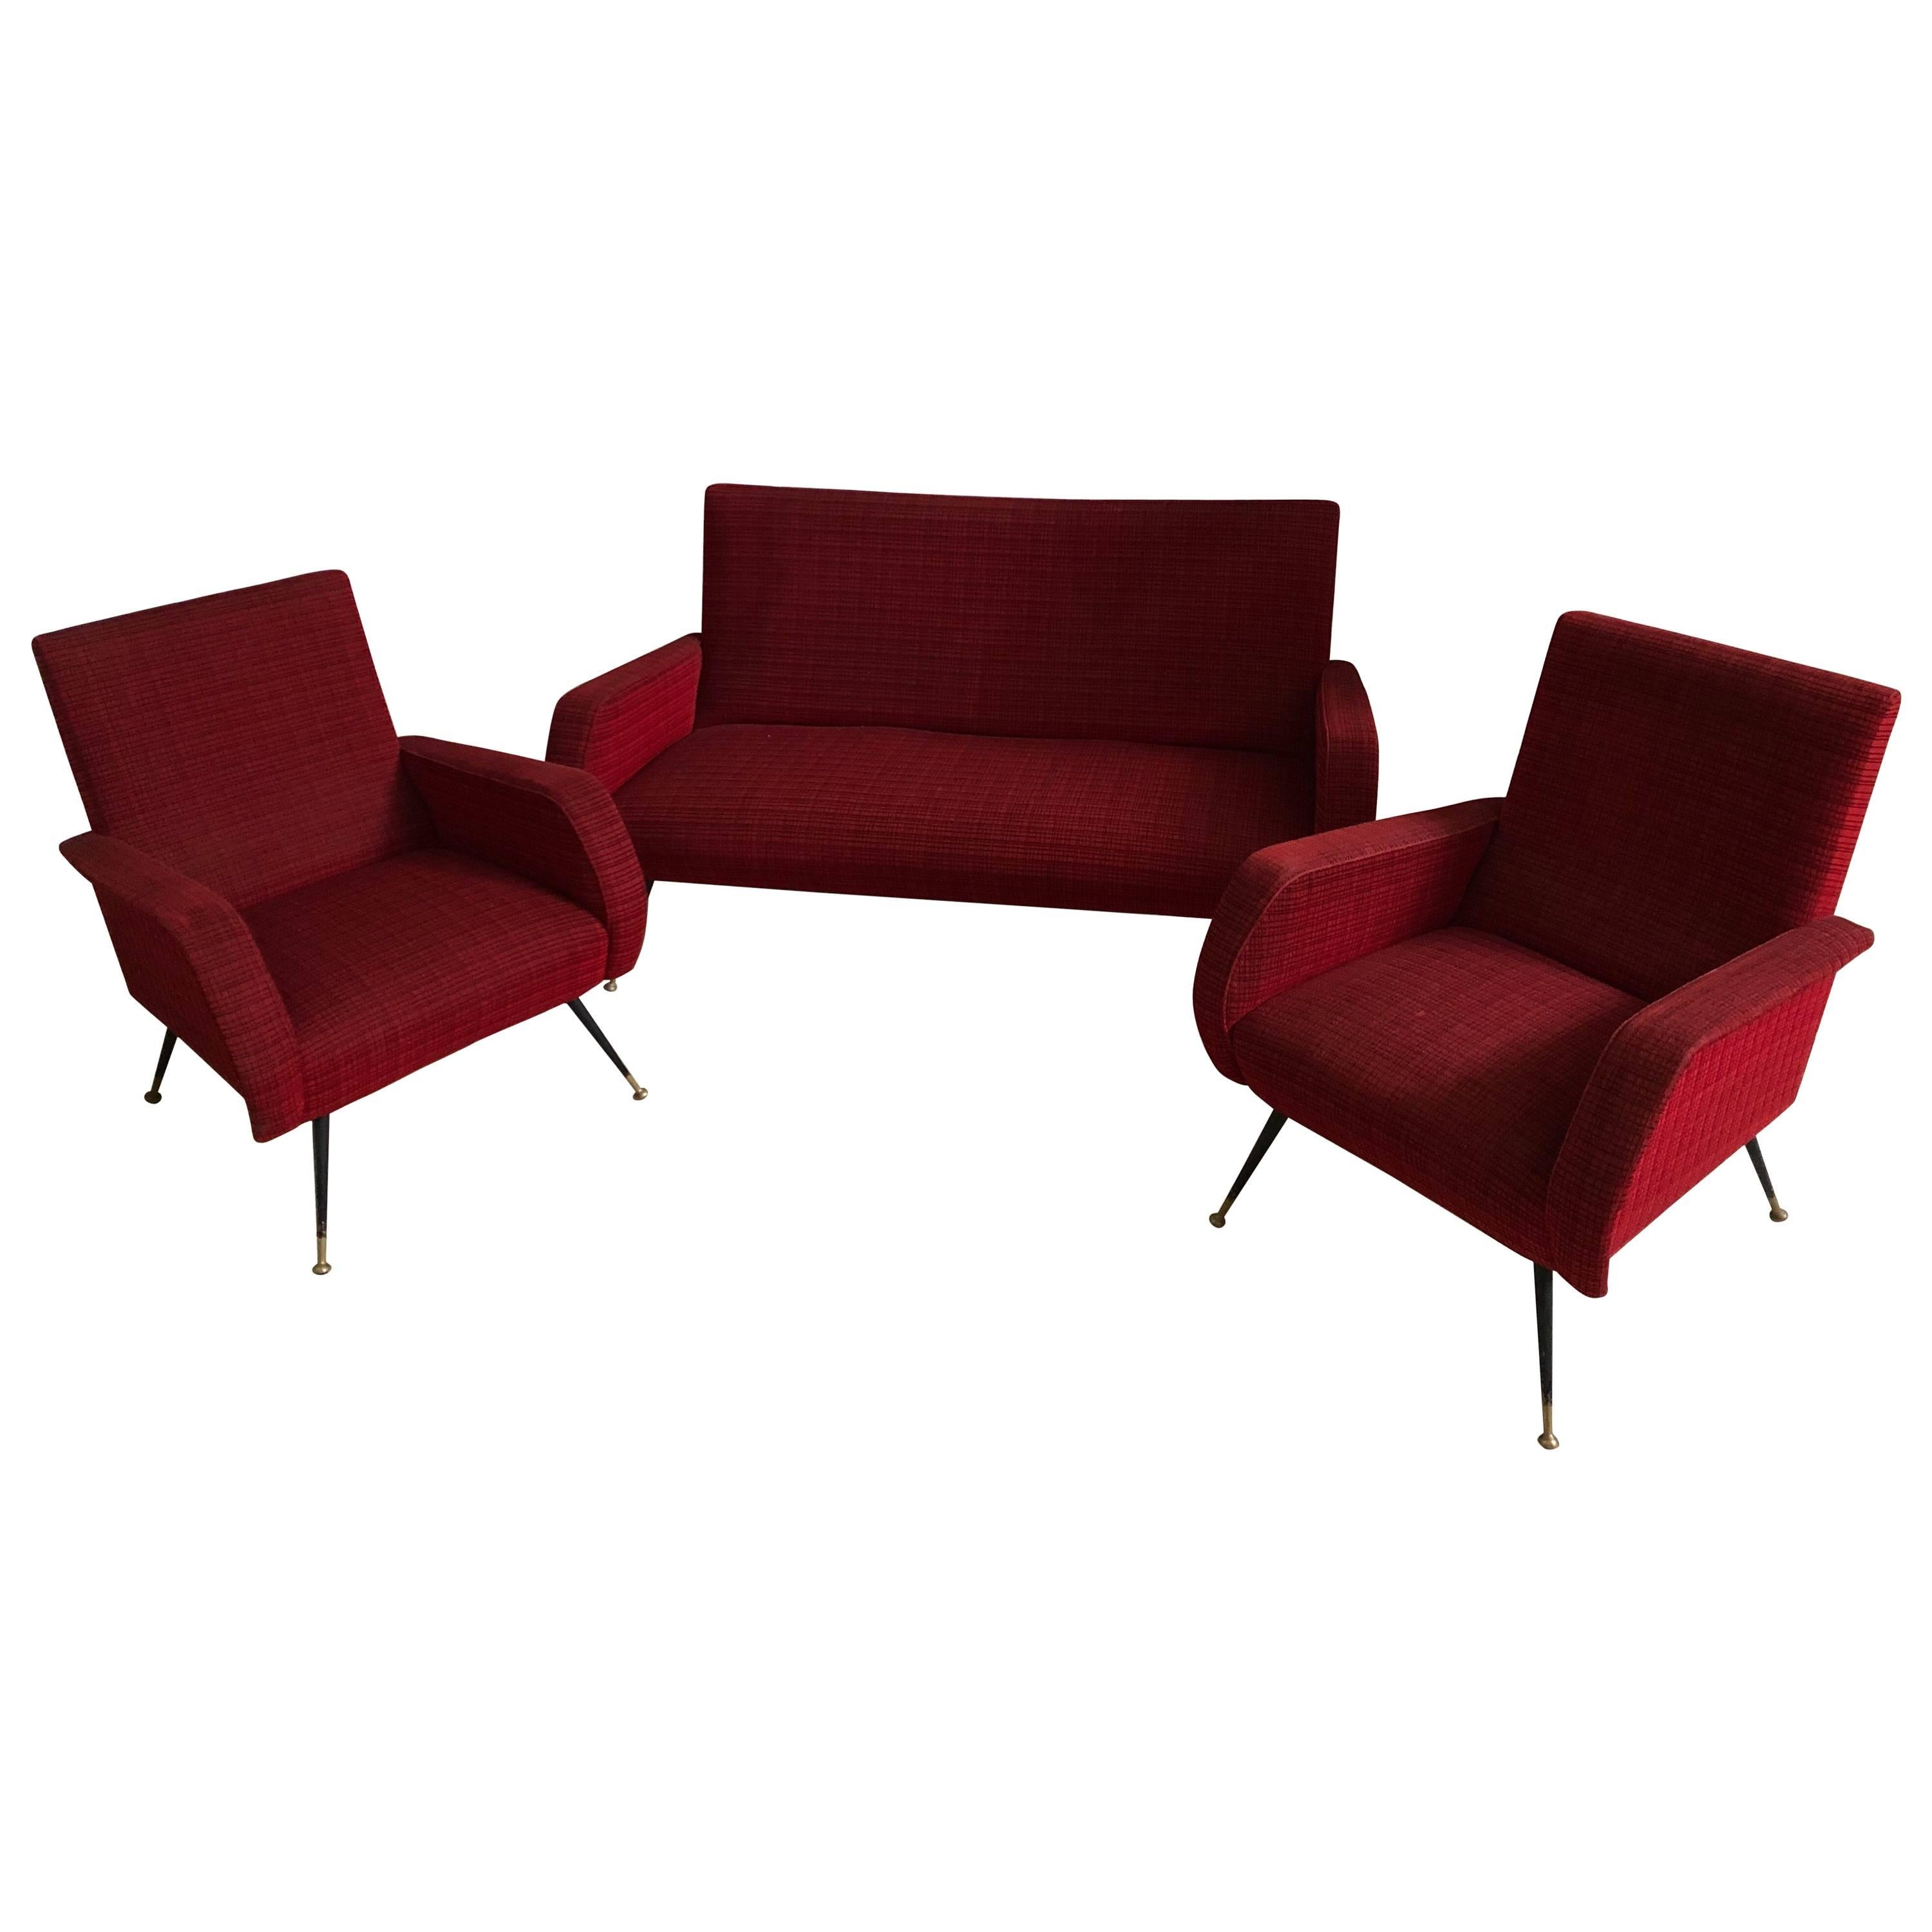 Mid-Century Modern Red fabric Sofa and Armchairs, Italy, circa 1950